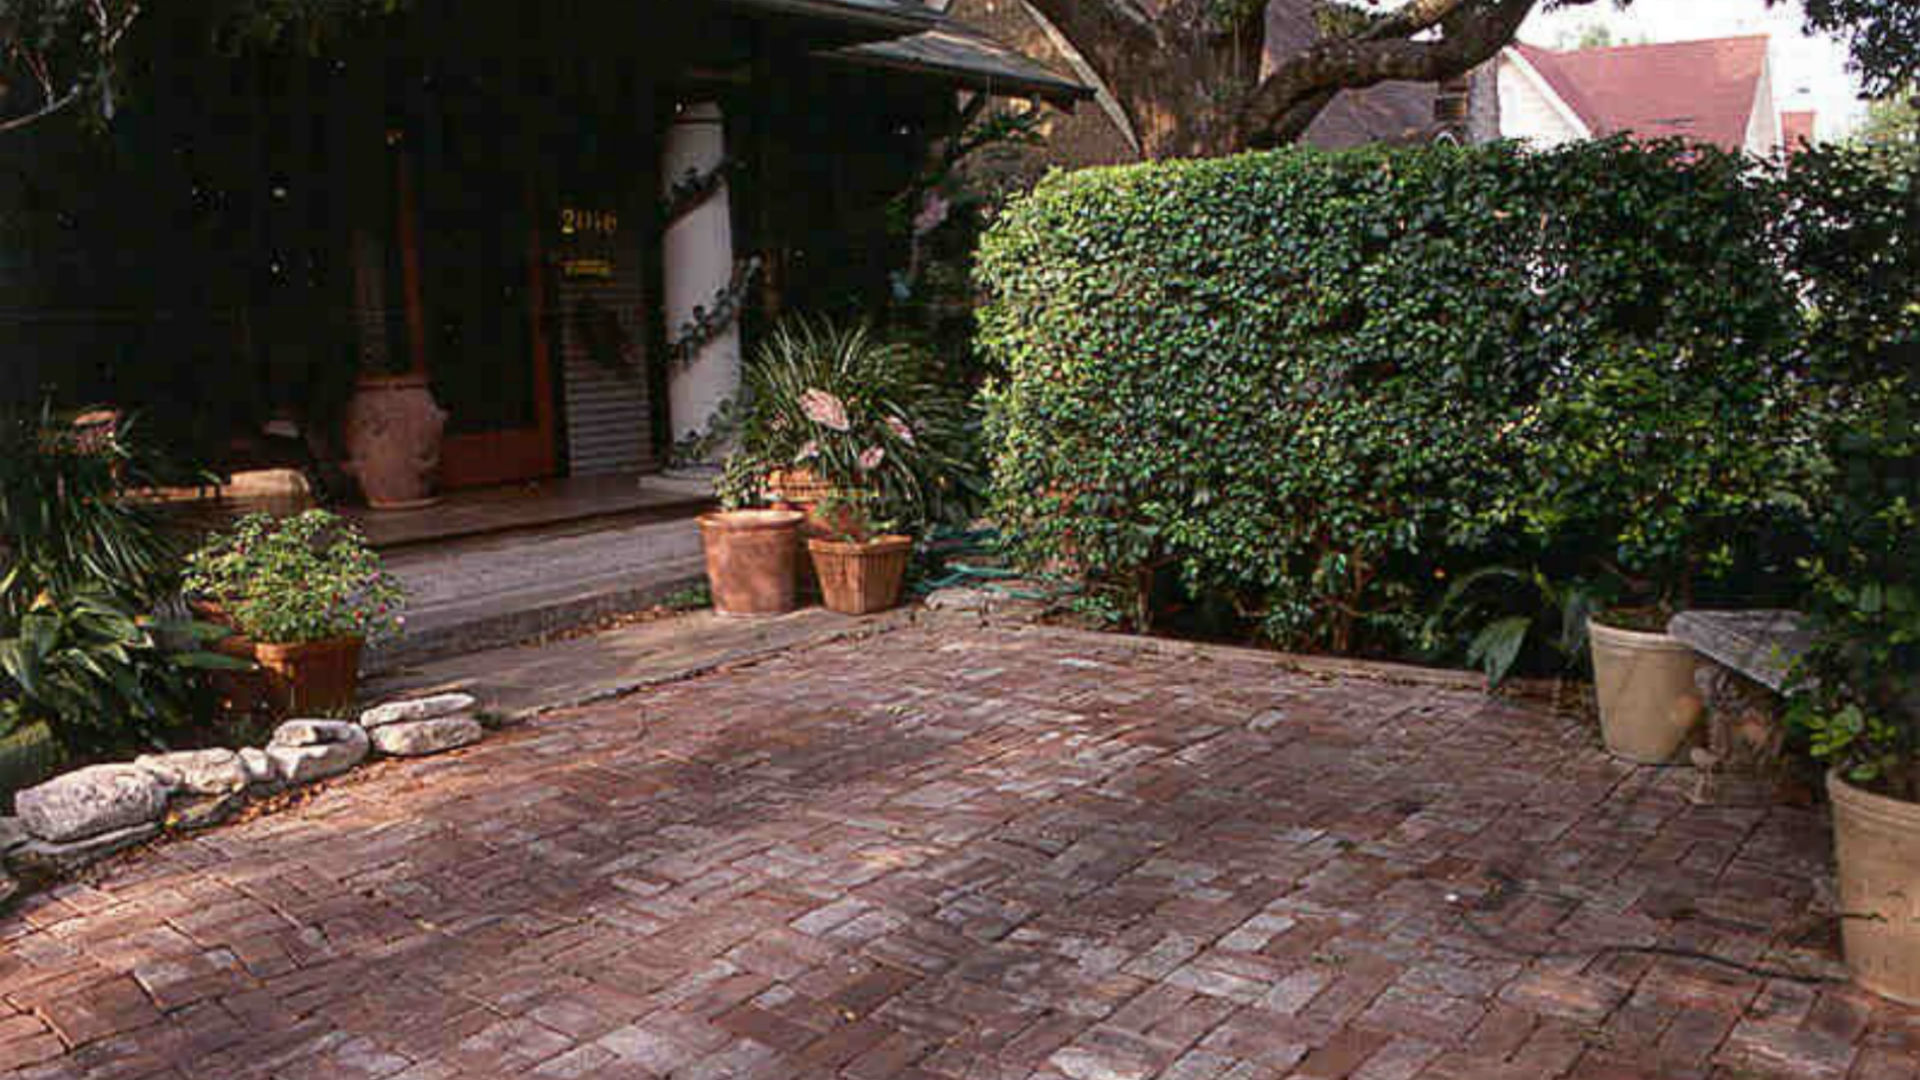 A brick patio assembled by hand (without mortar) is a craft.